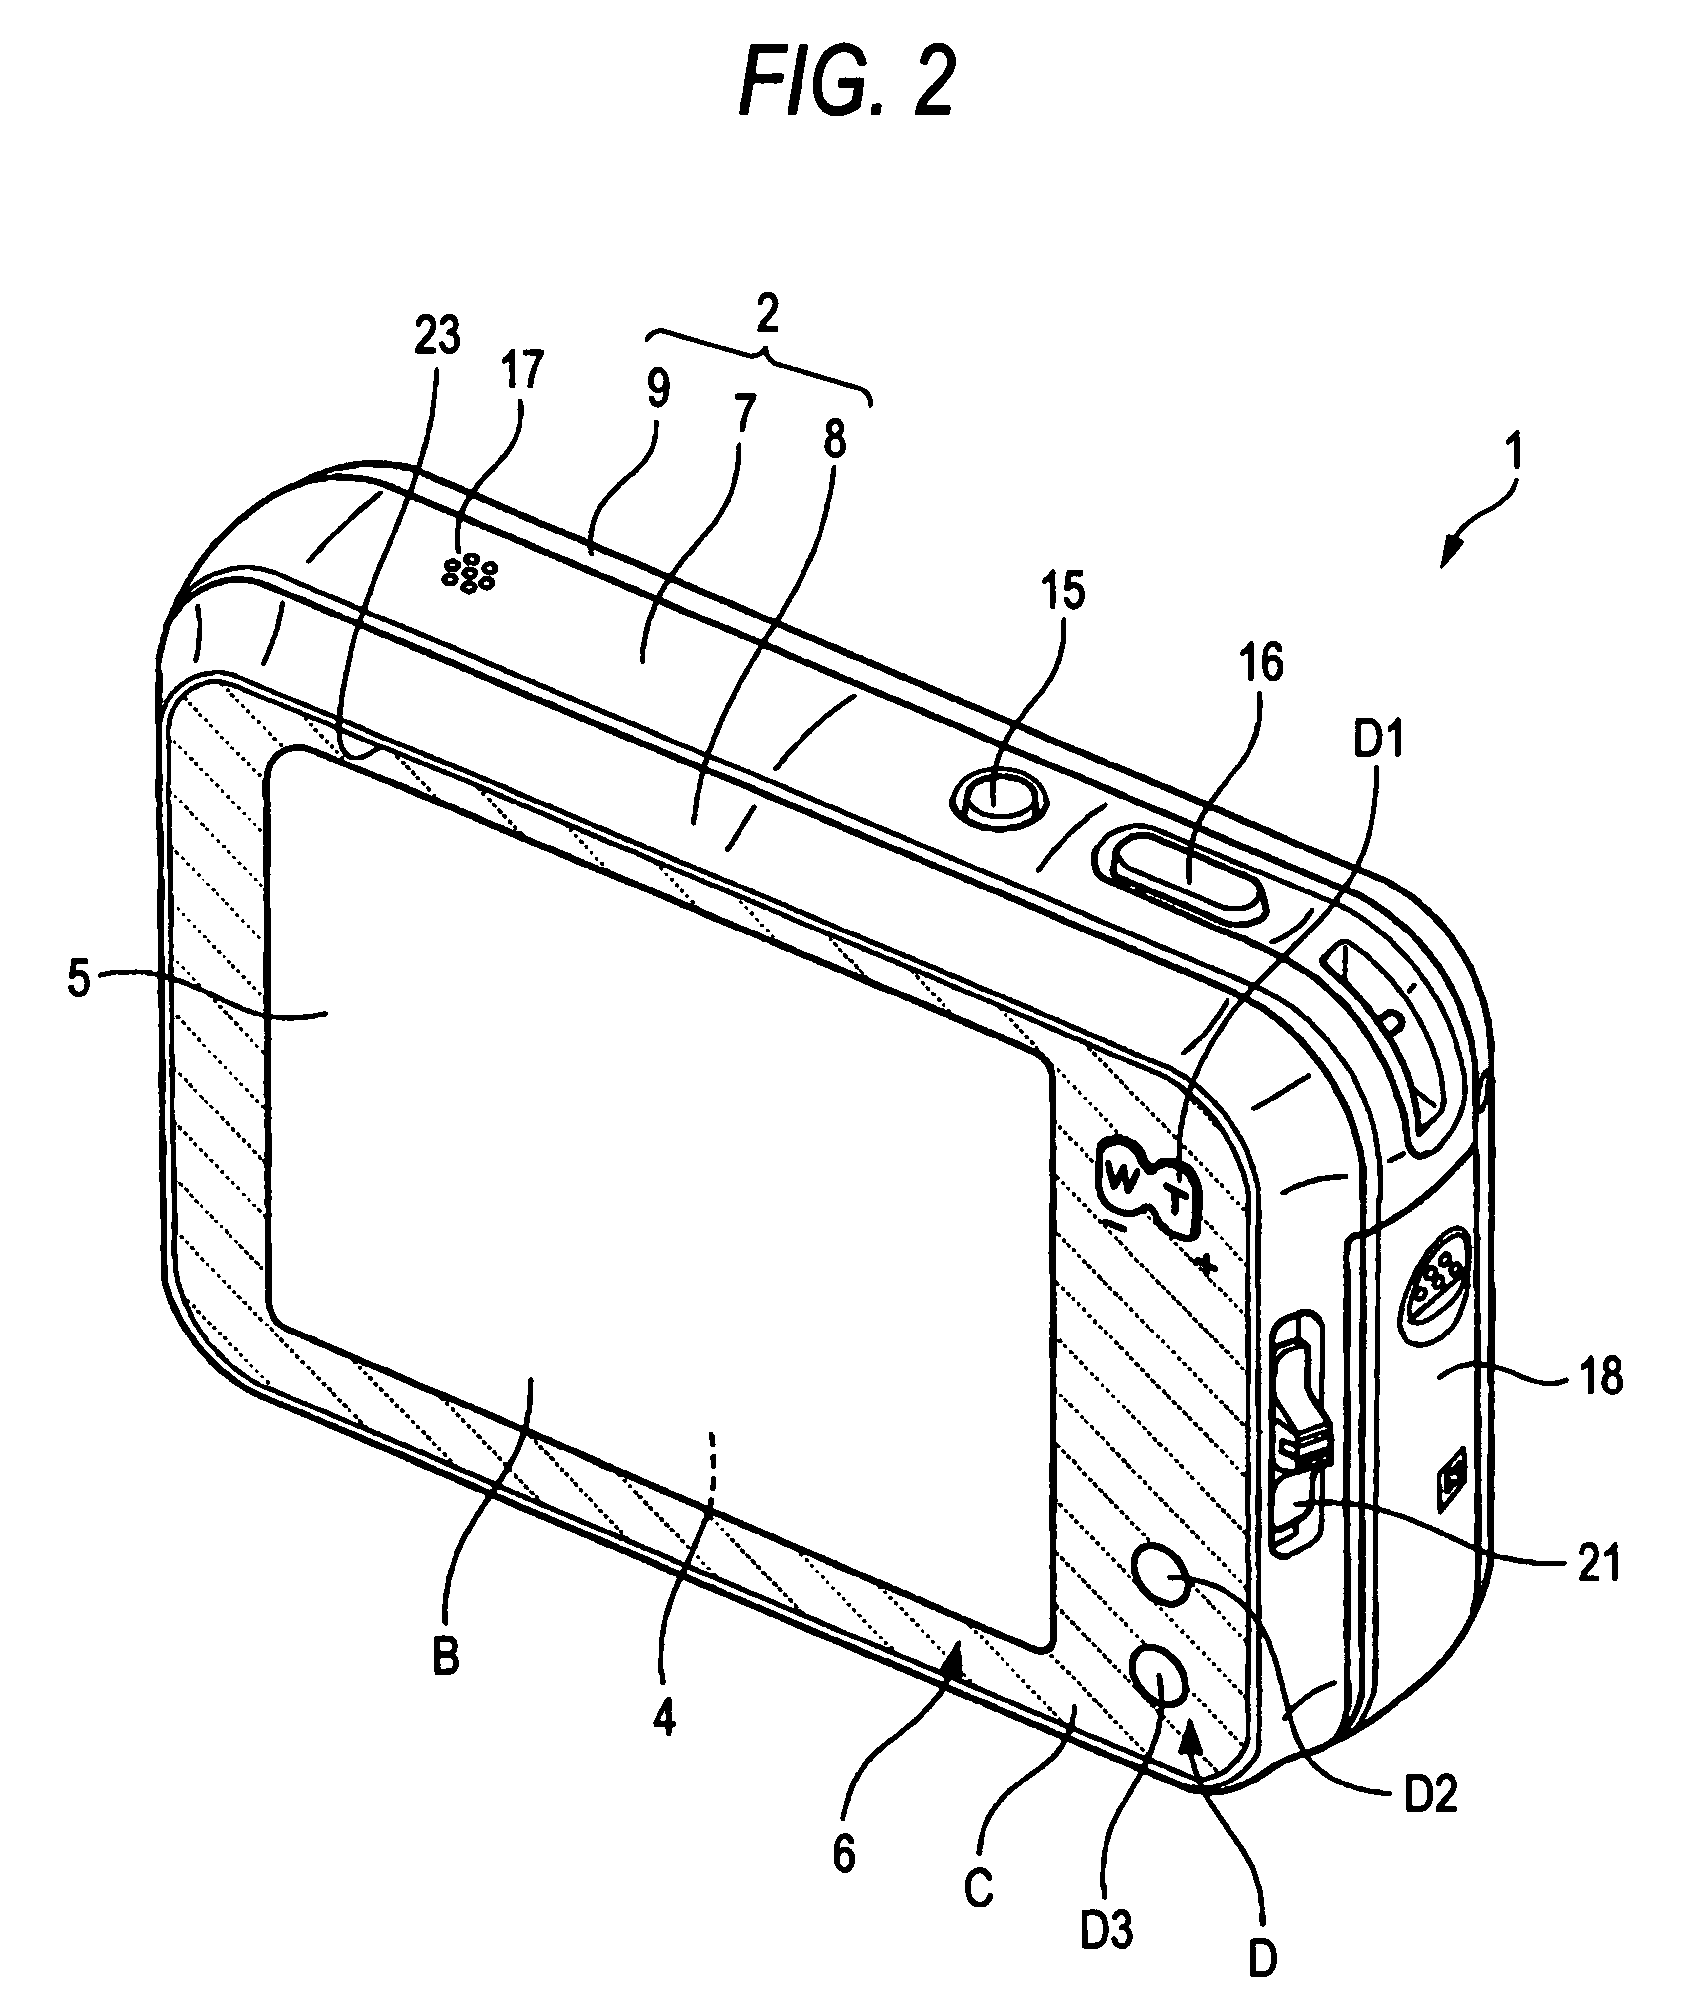 Display device equipped with a touch panel